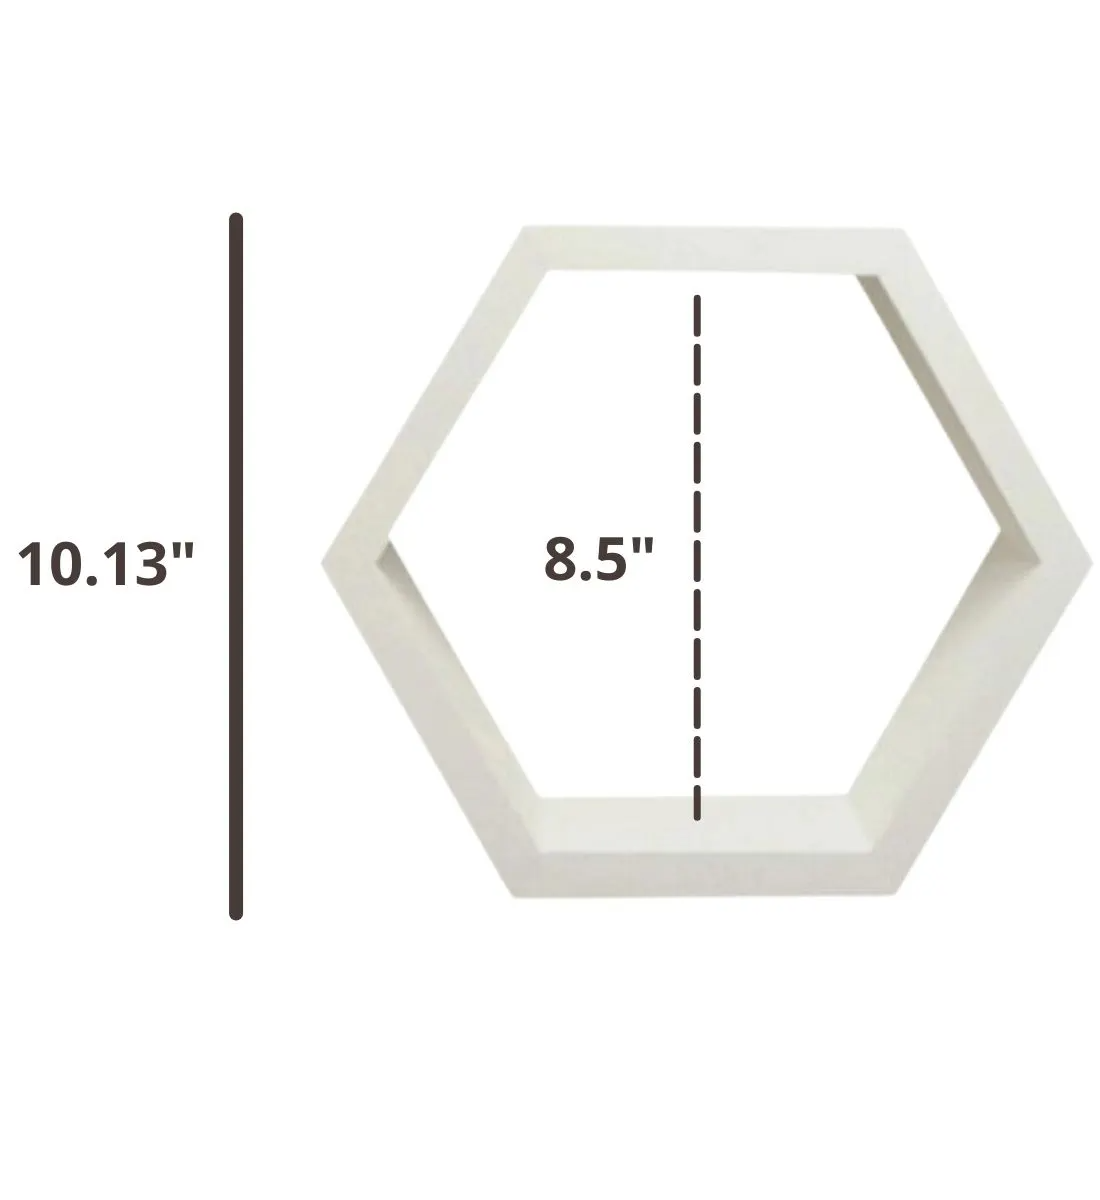 10.13 inches tall hex shelves with 8.5 inches inner height